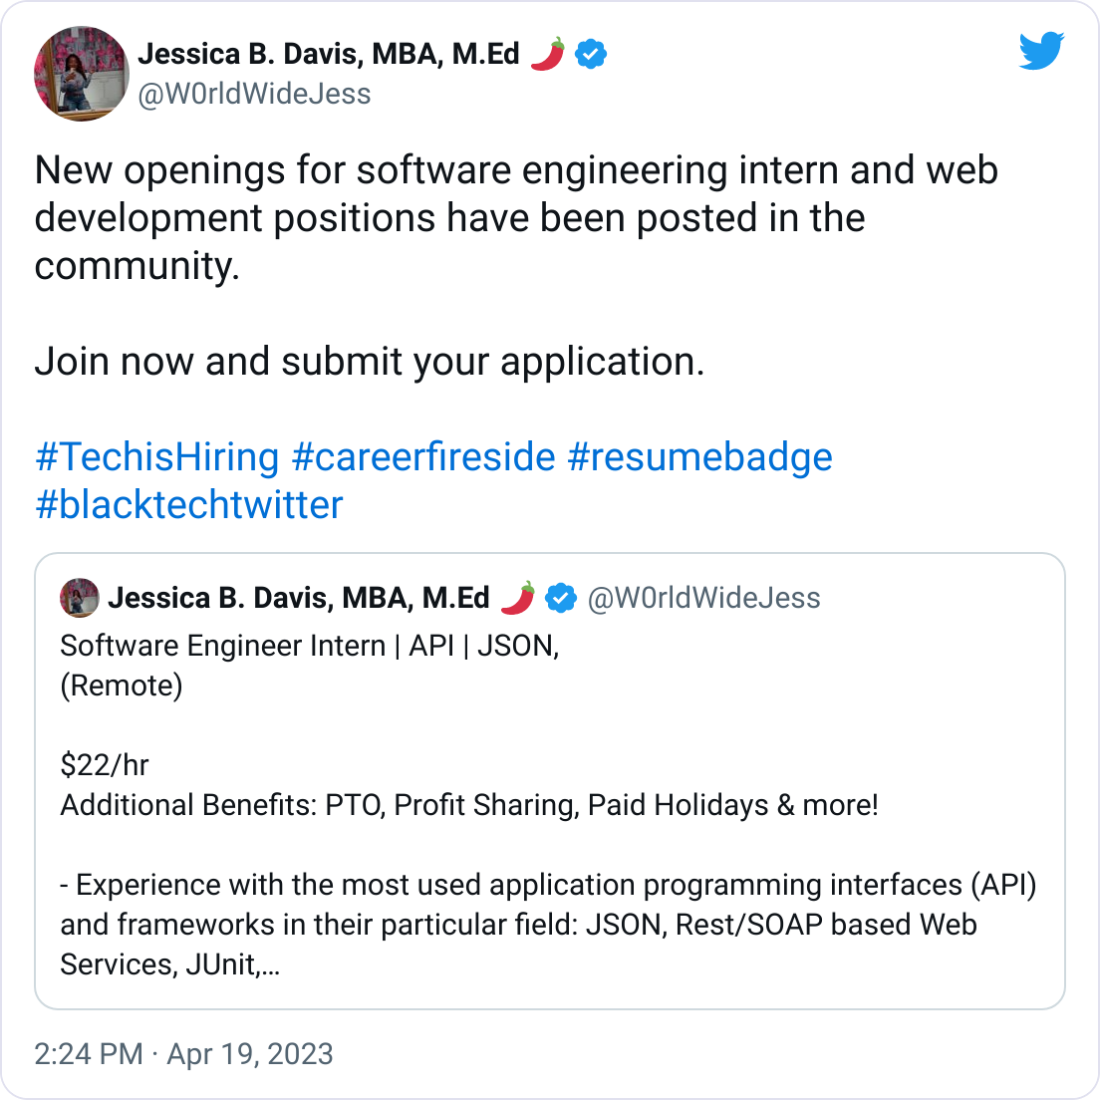 Jessica B. Davis, MBA, M.Ed 🌶 @W0rldWideJess New openings for software engineering intern and web development positions have been posted in the community.   Join now and submit your application.  #TechisHiring #careerfireside #resumebadge #blacktechtwitter